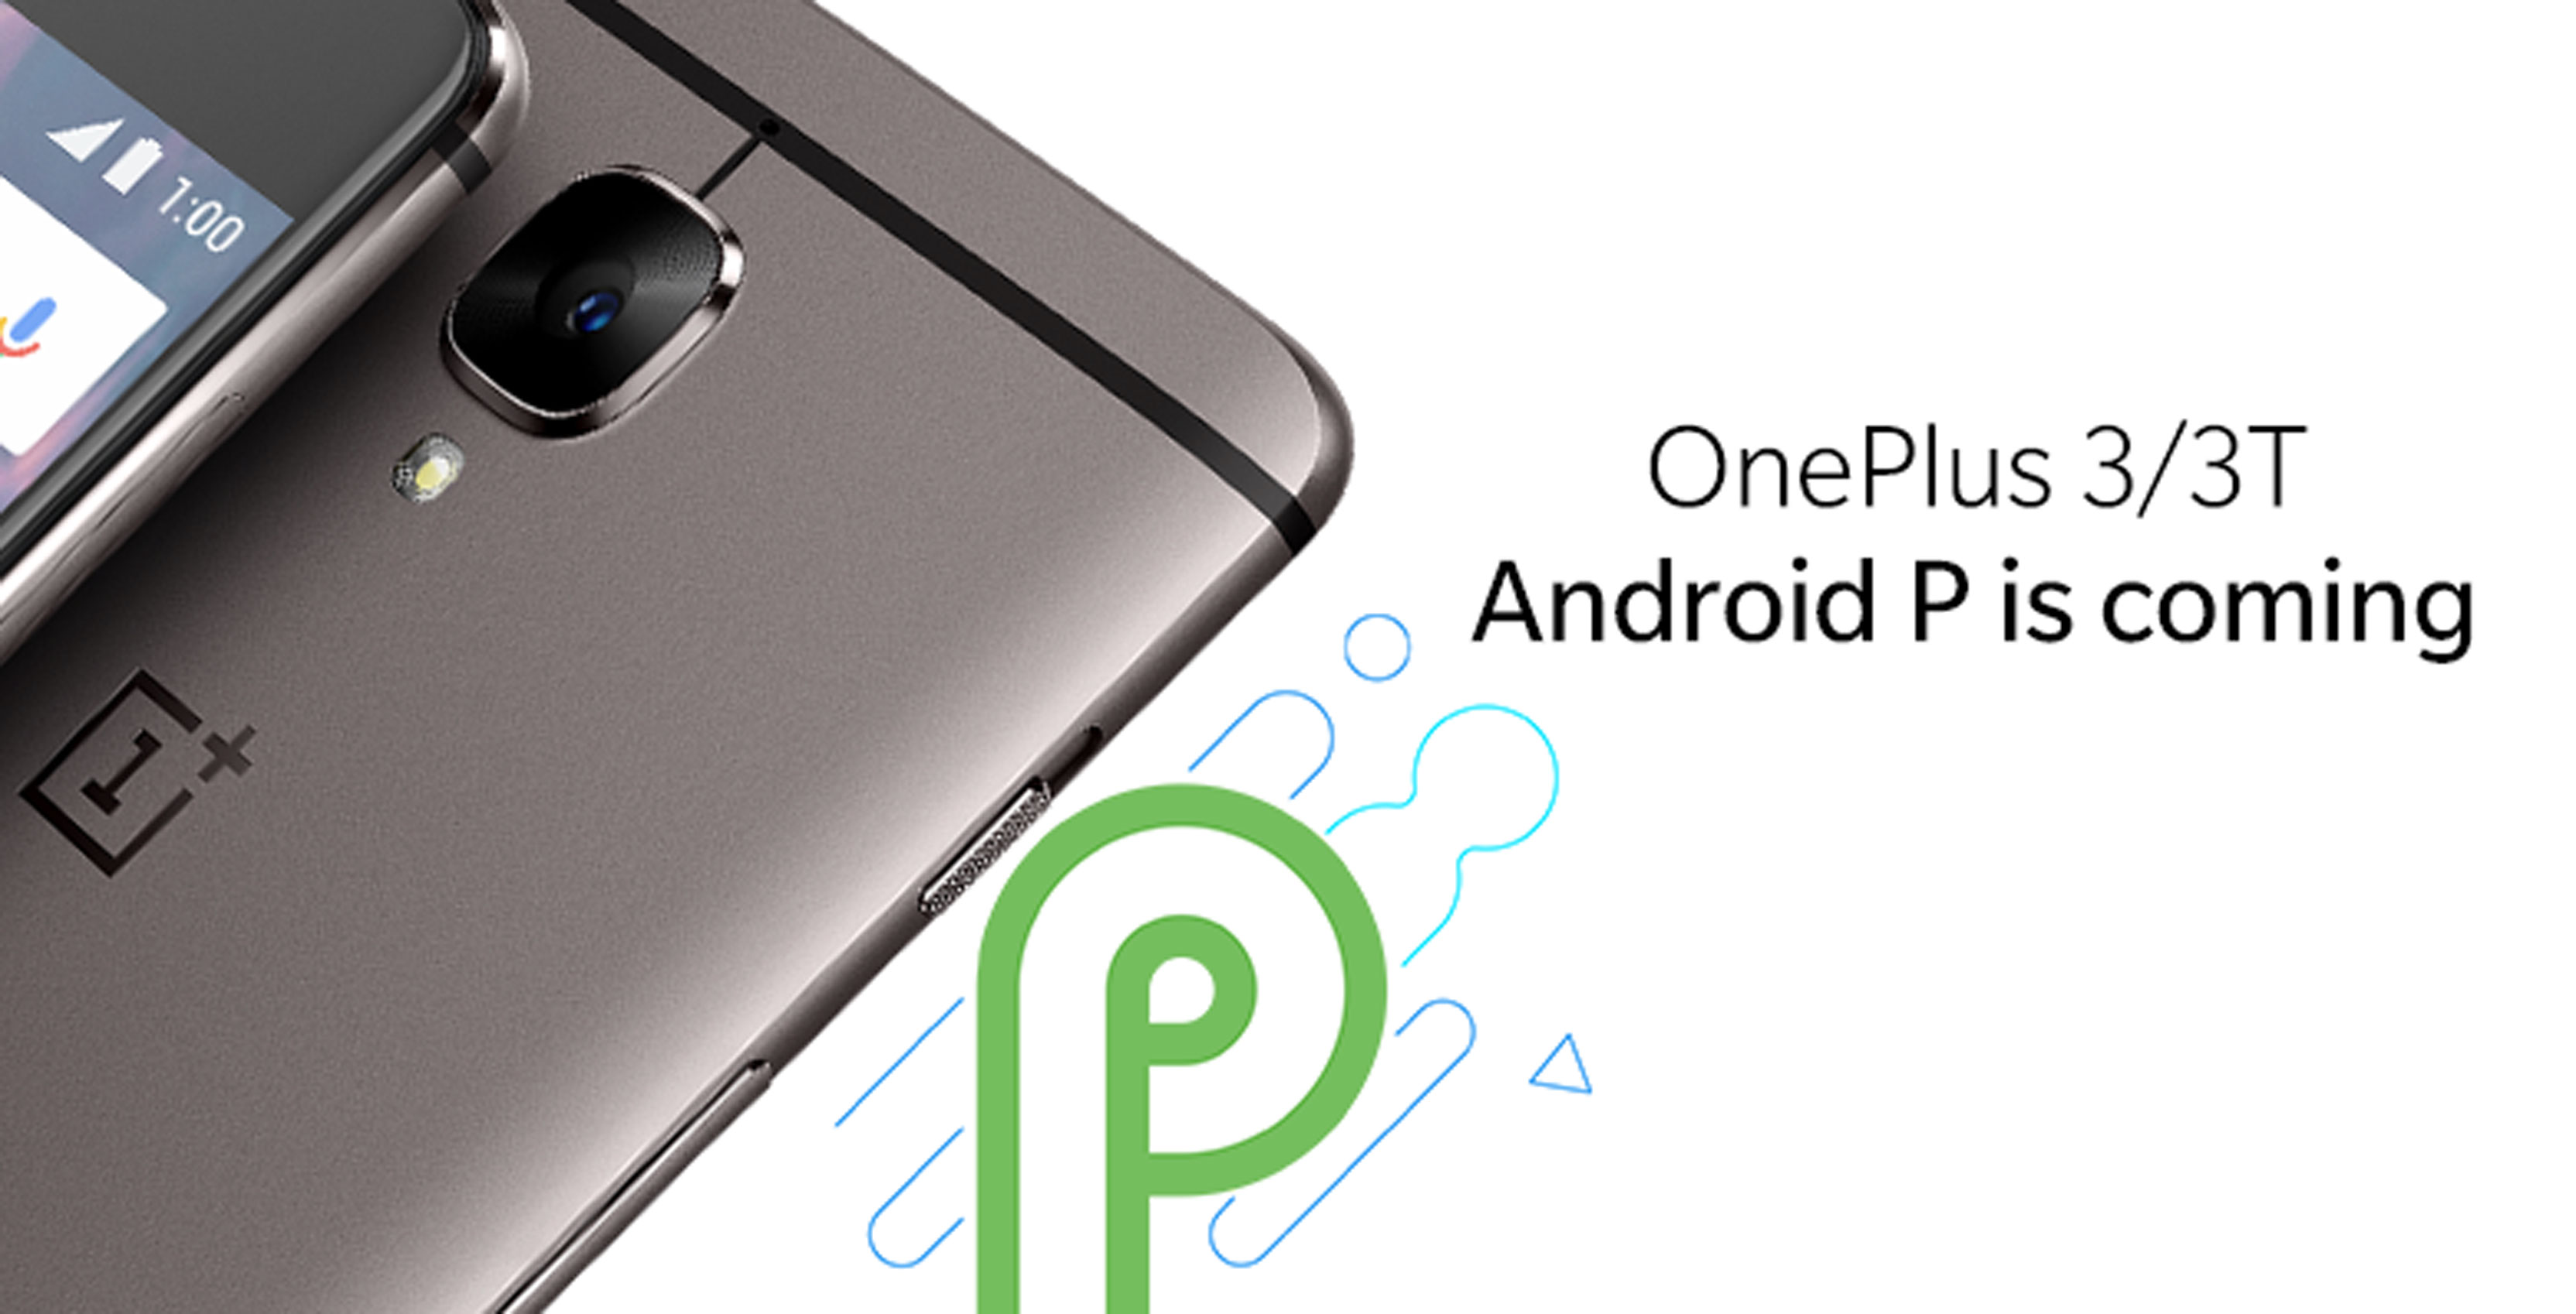 Android P is coming to the OnePlus 3 and 3T